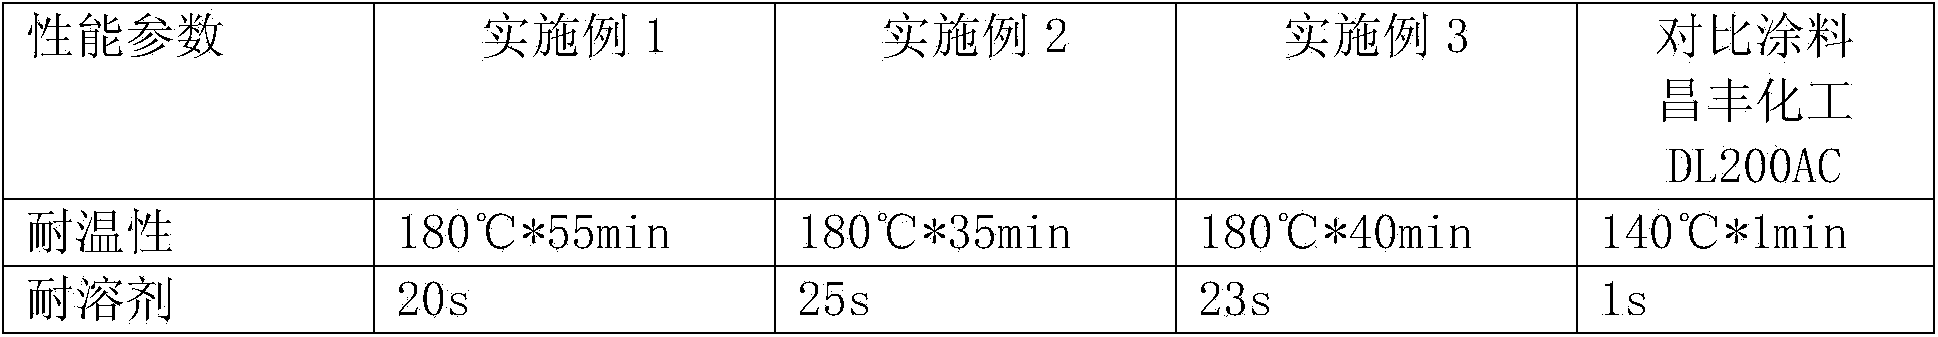 Coating composition for transferable laser anti-counterfeiting plate and method for preparing transferable laser anti-counterfeiting plate